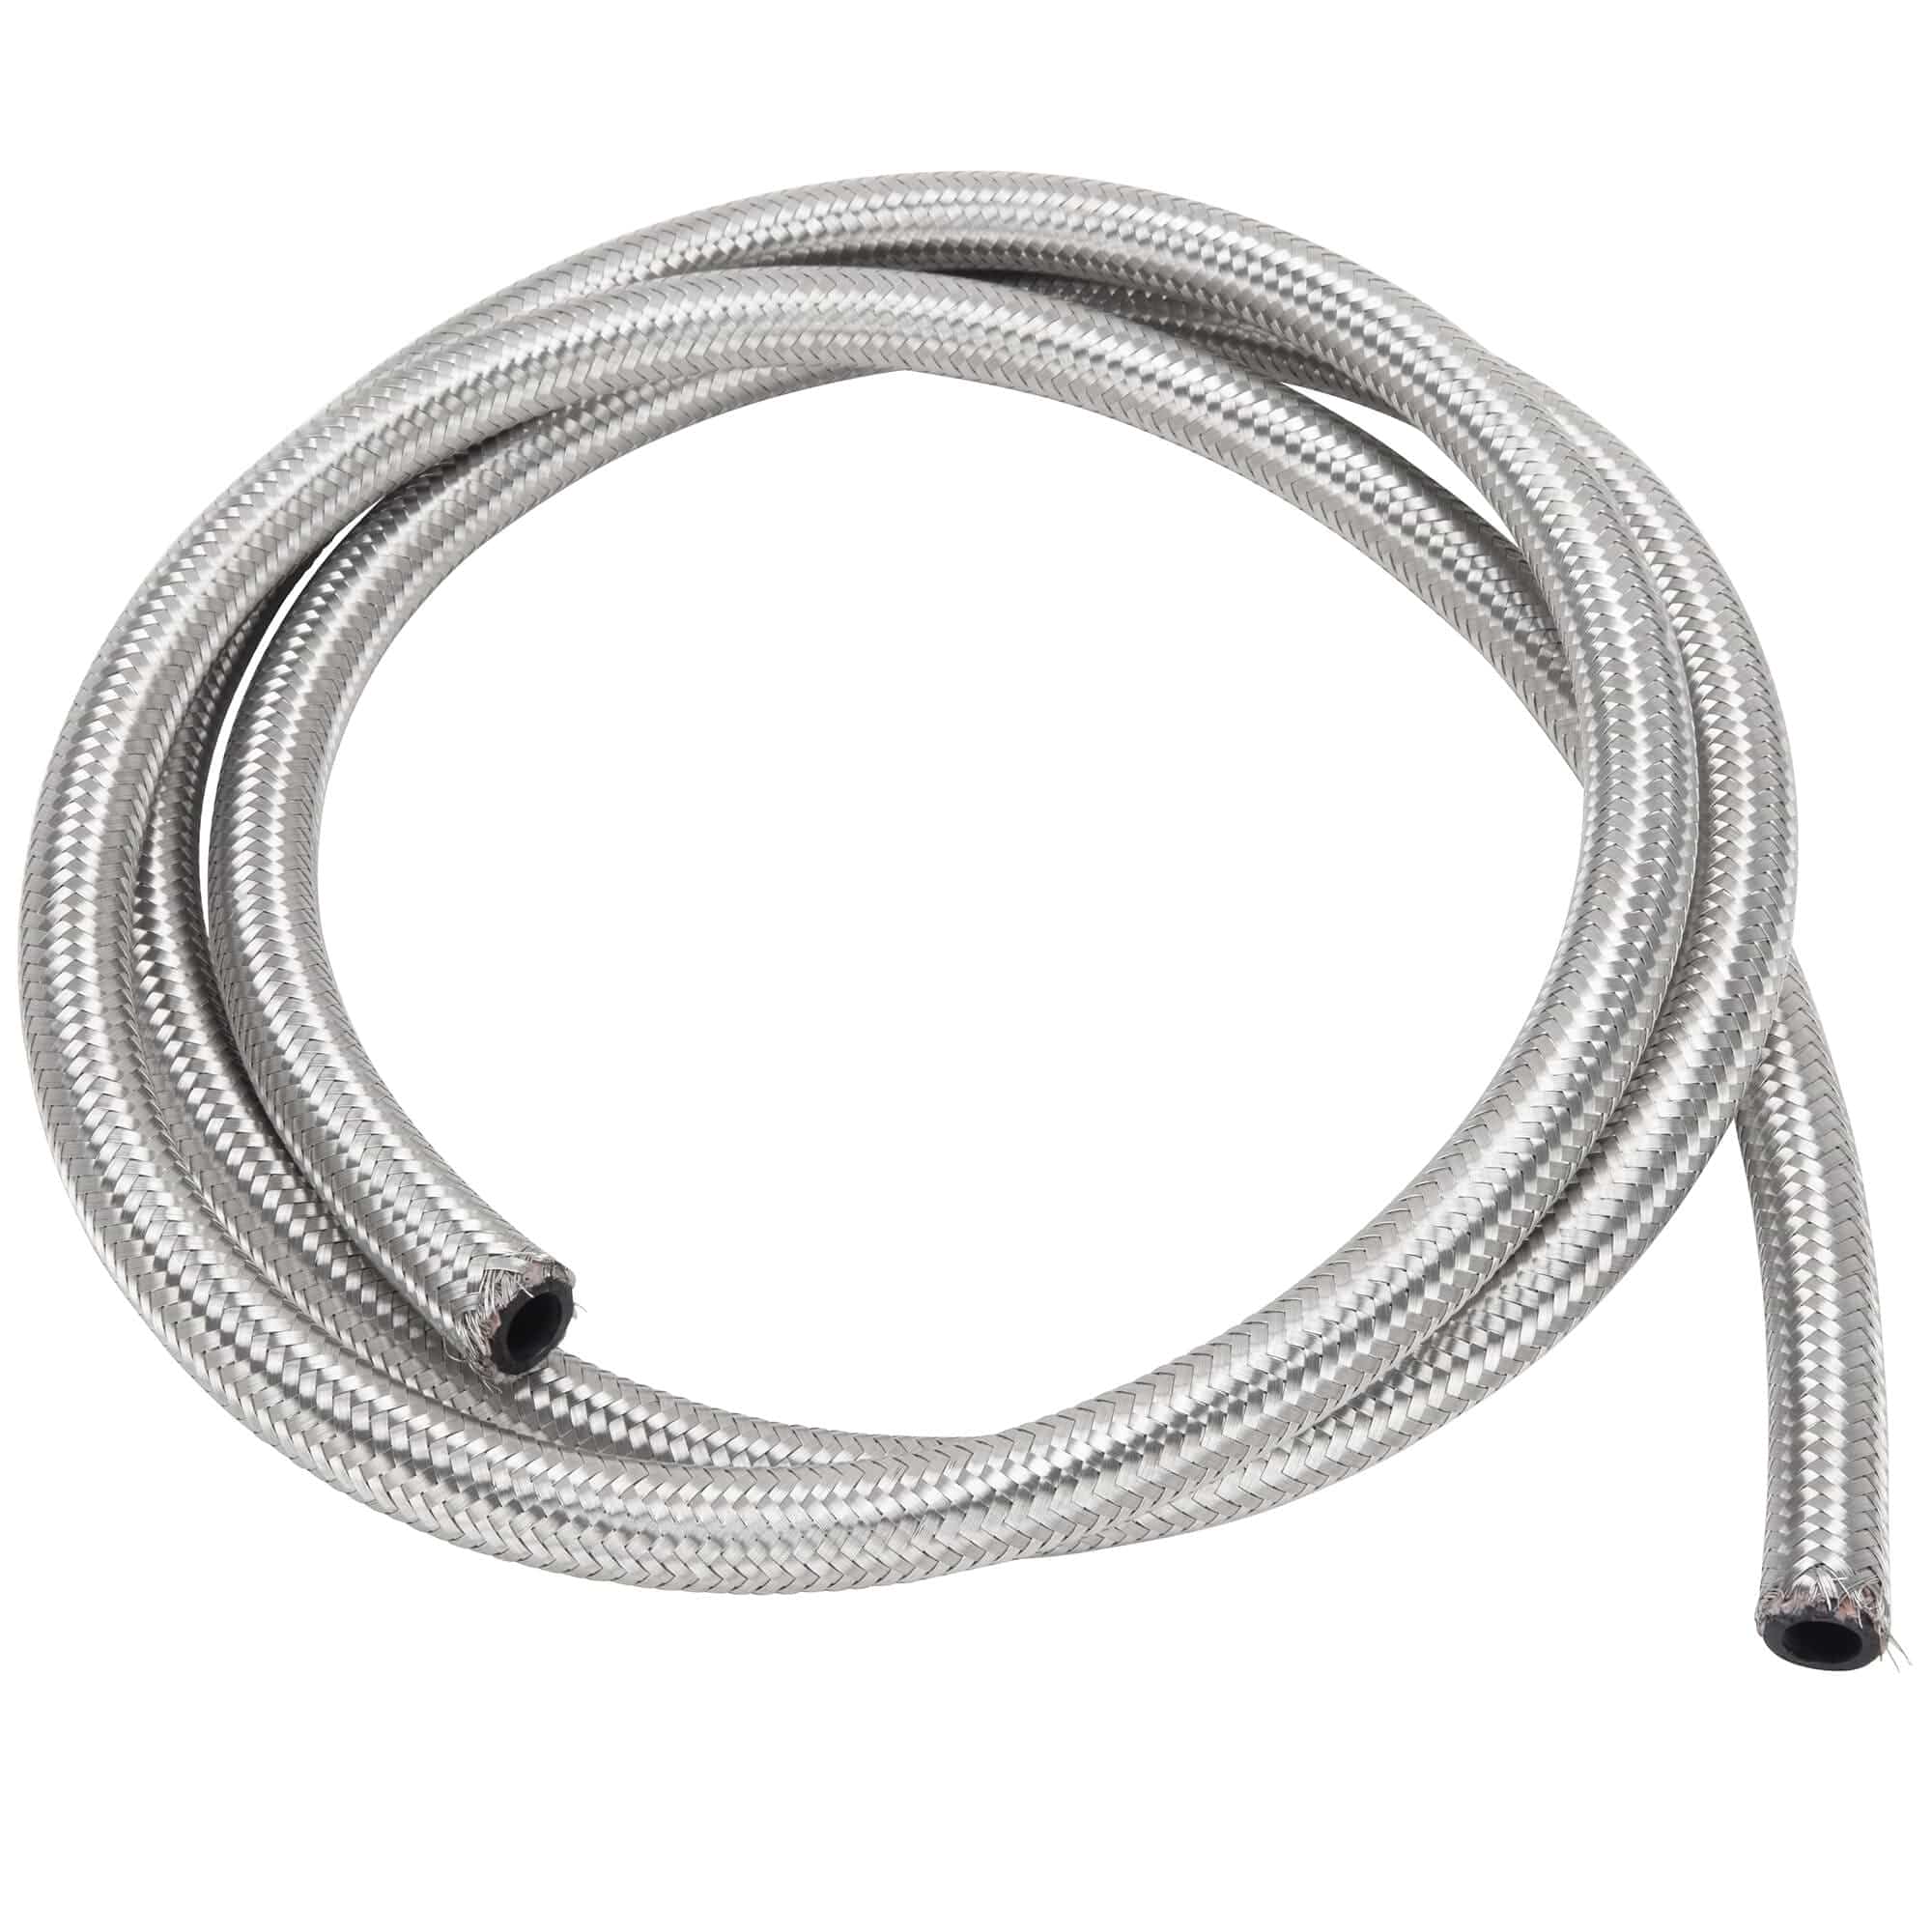 Cycle Standard 3/8 inch Braided Stainless Fuel Line - 6 ft